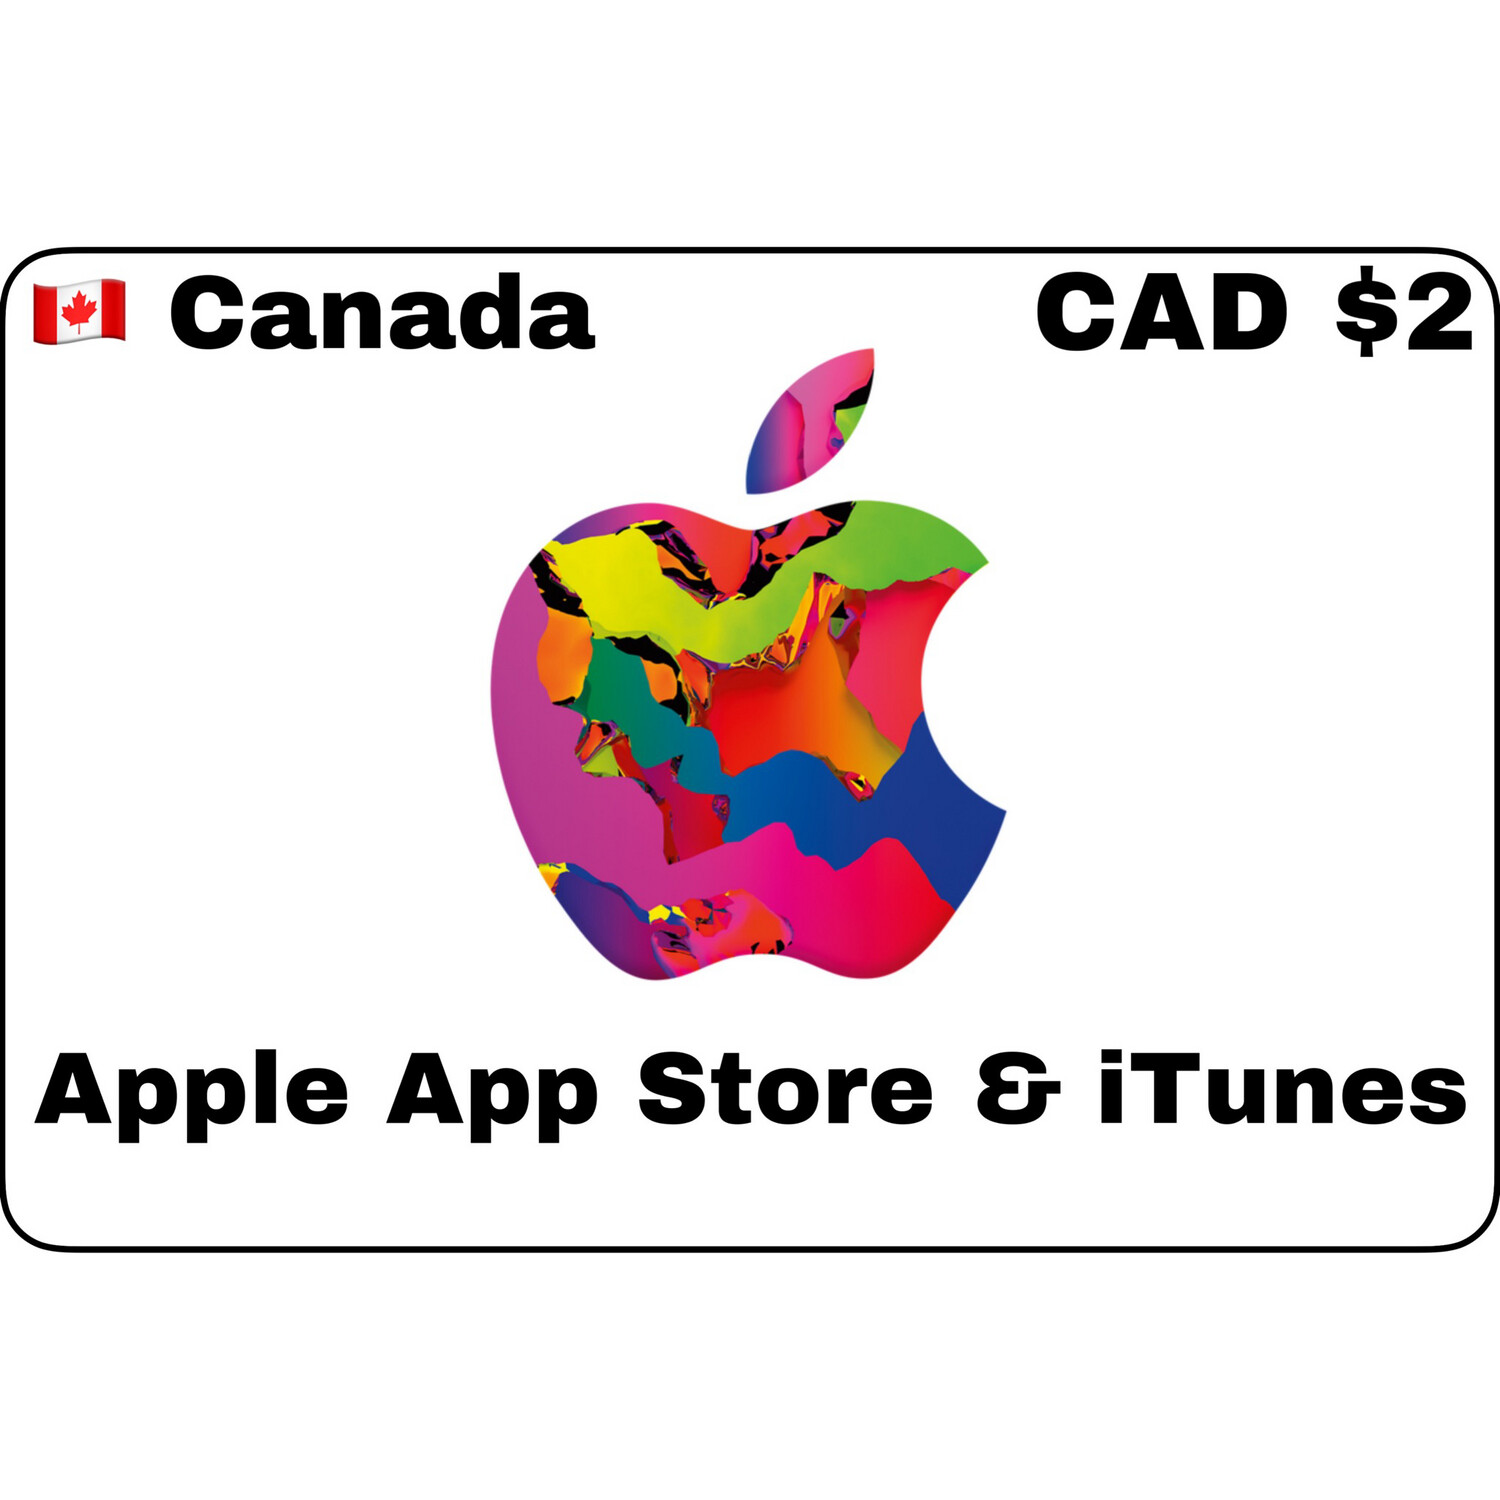 Apple iTunes Gift Card Canada CAD $2